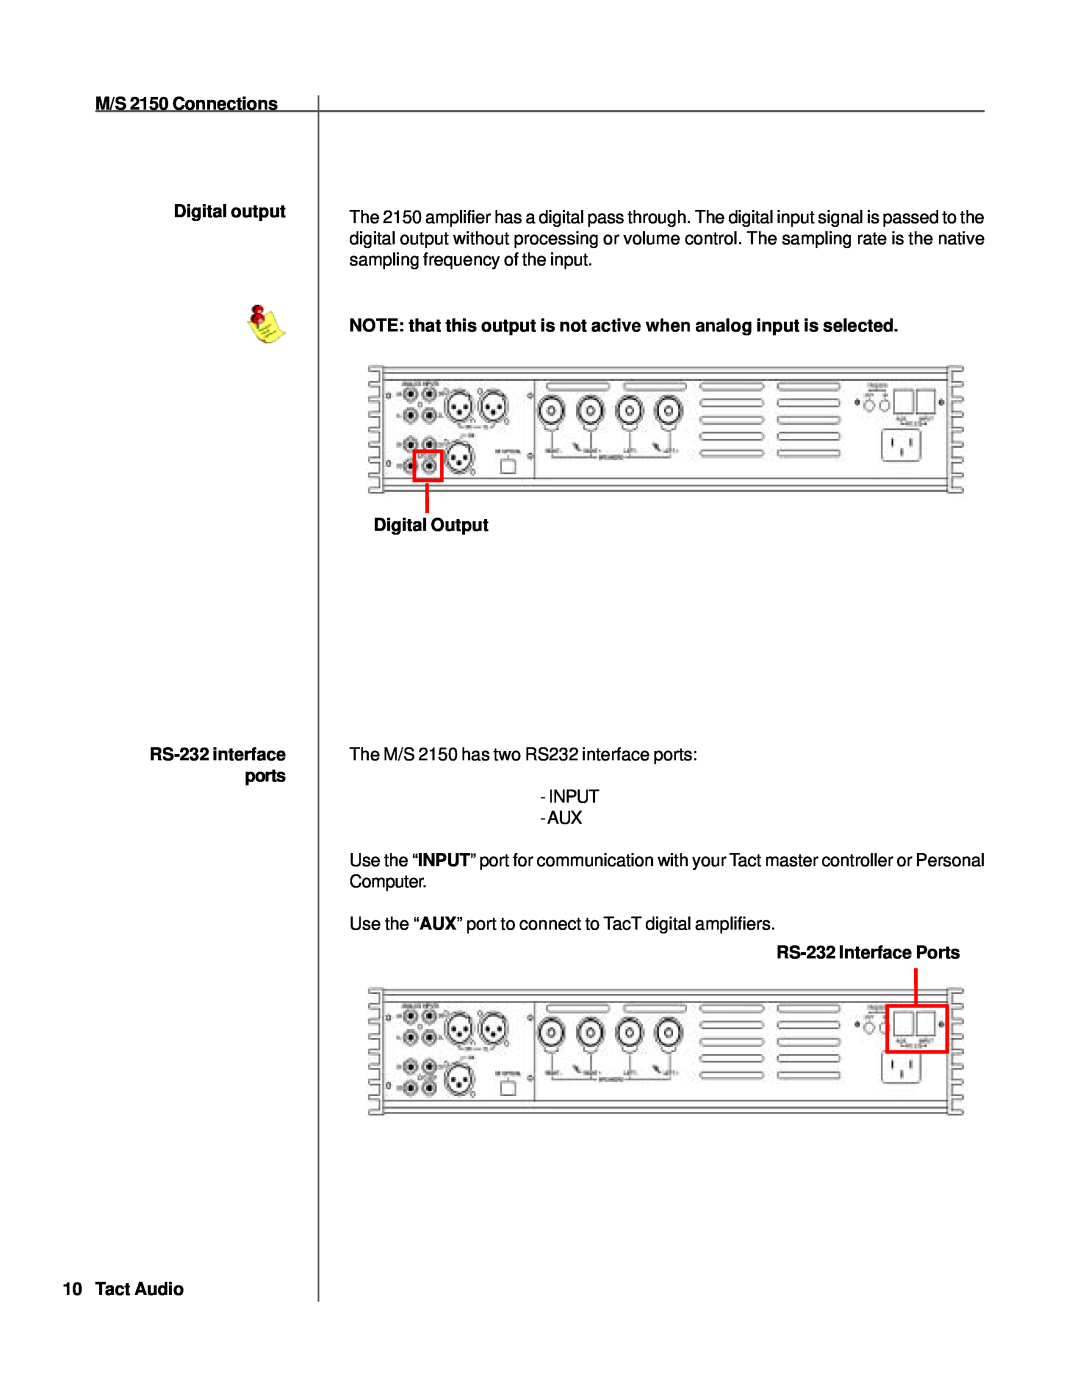 TacT Audio S2150, M2150 owner manual M/S 2150 Connections 